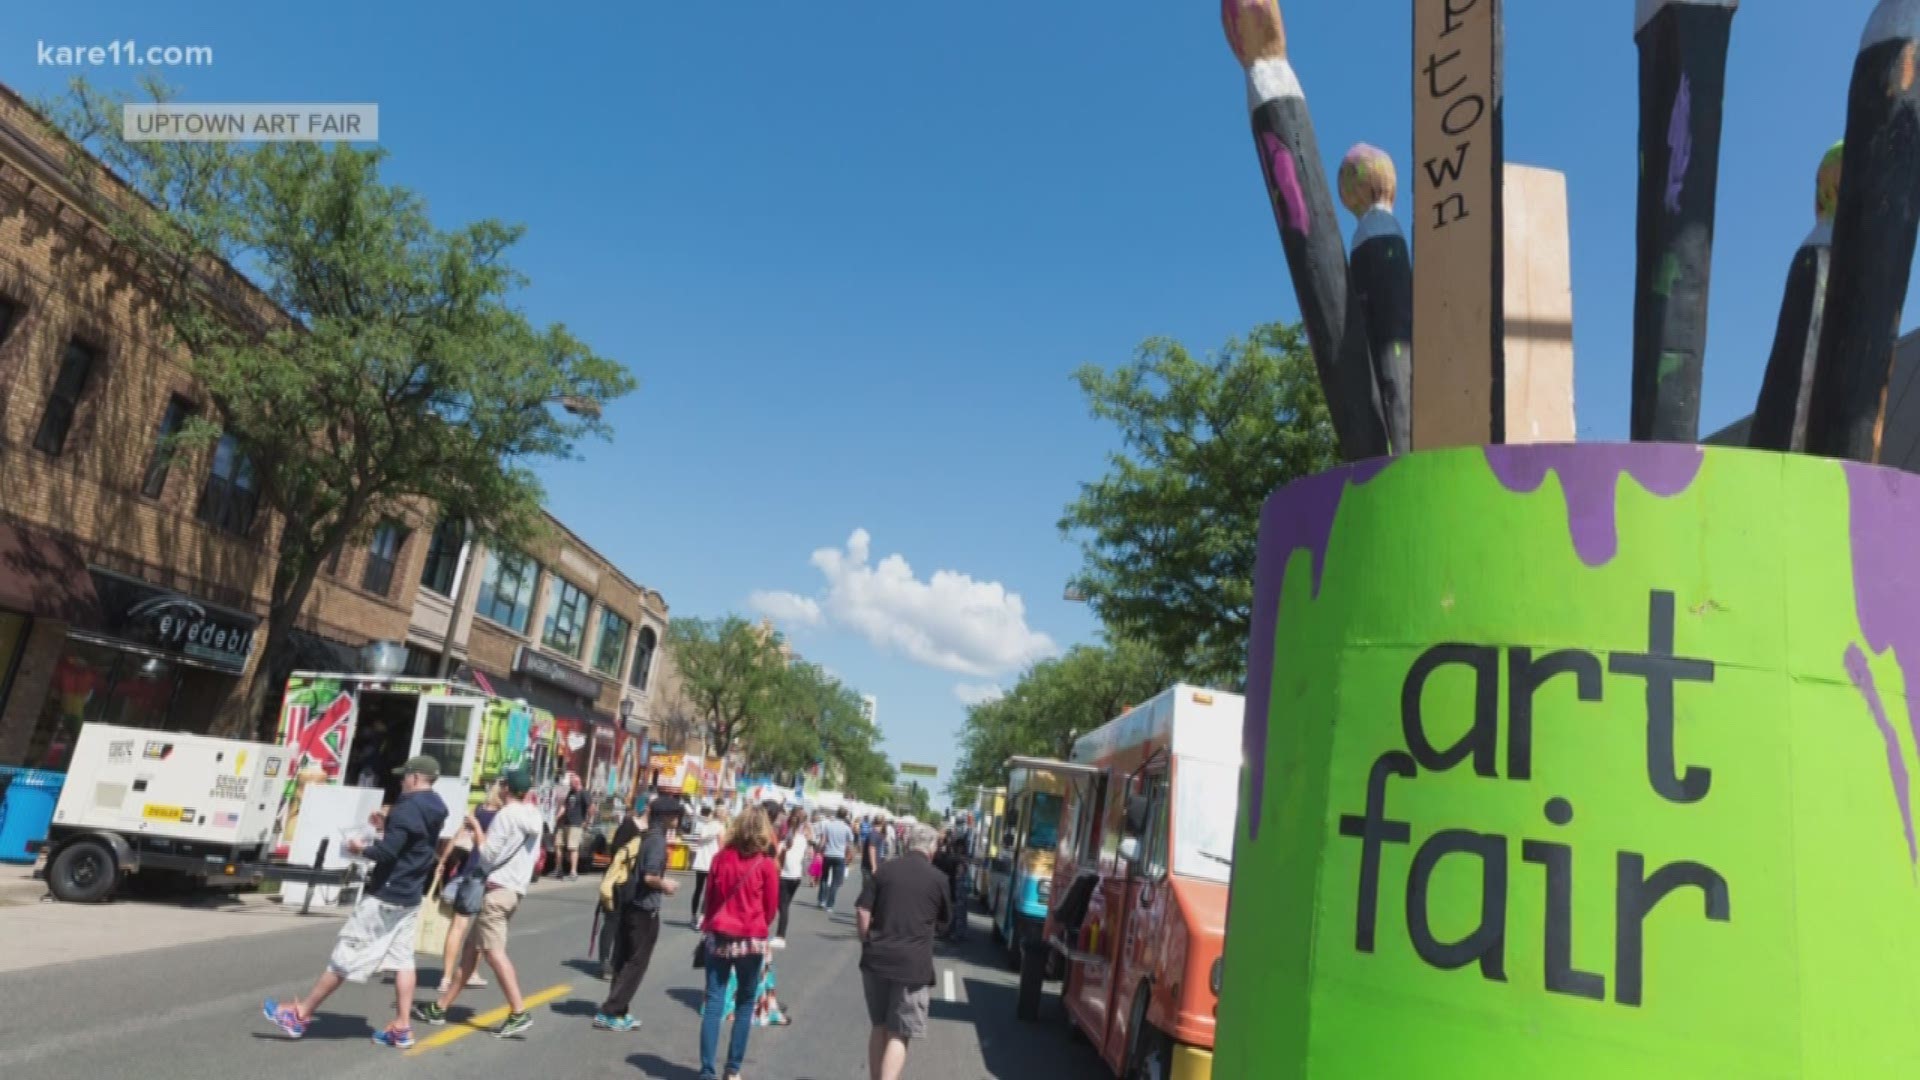 Visit the Uptown Art Fair August 2-4 to see great art from more than 325 artists from around the world and explore this year’s new elements.